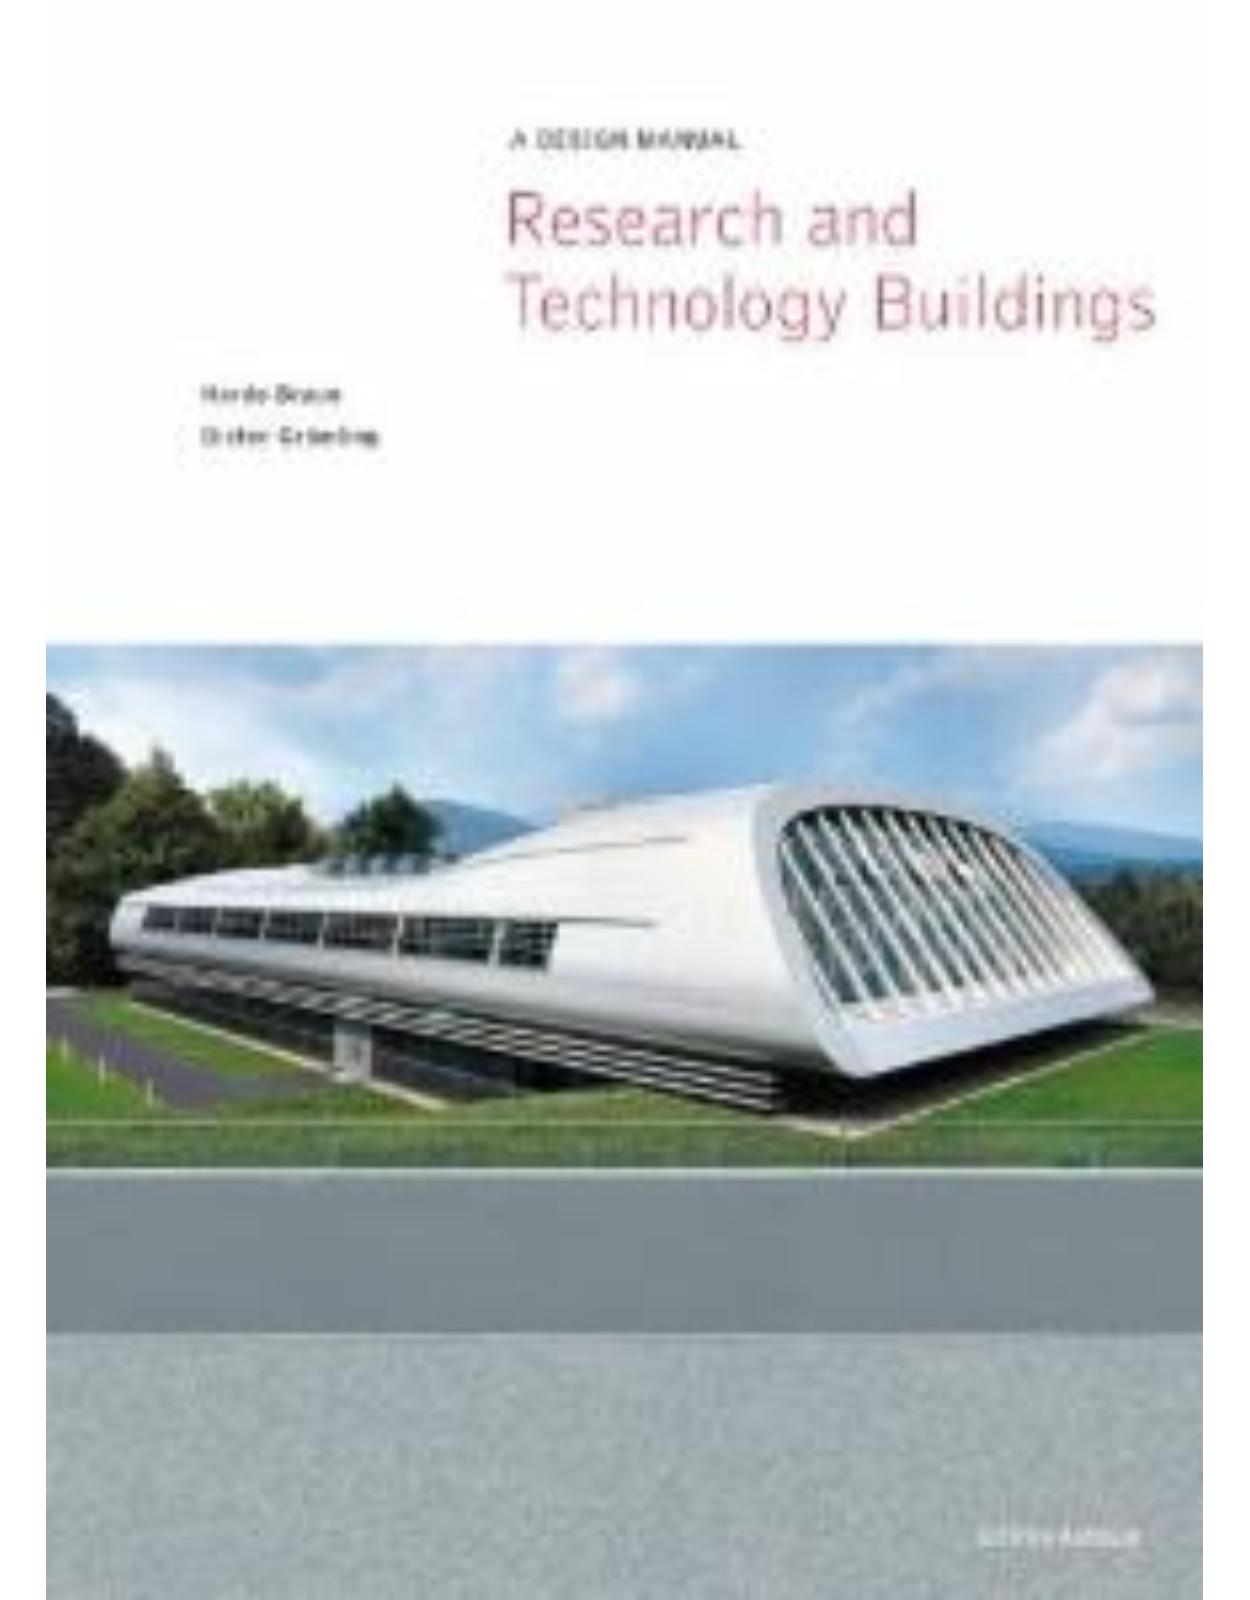 Research and Technology Buildings - A design Manual